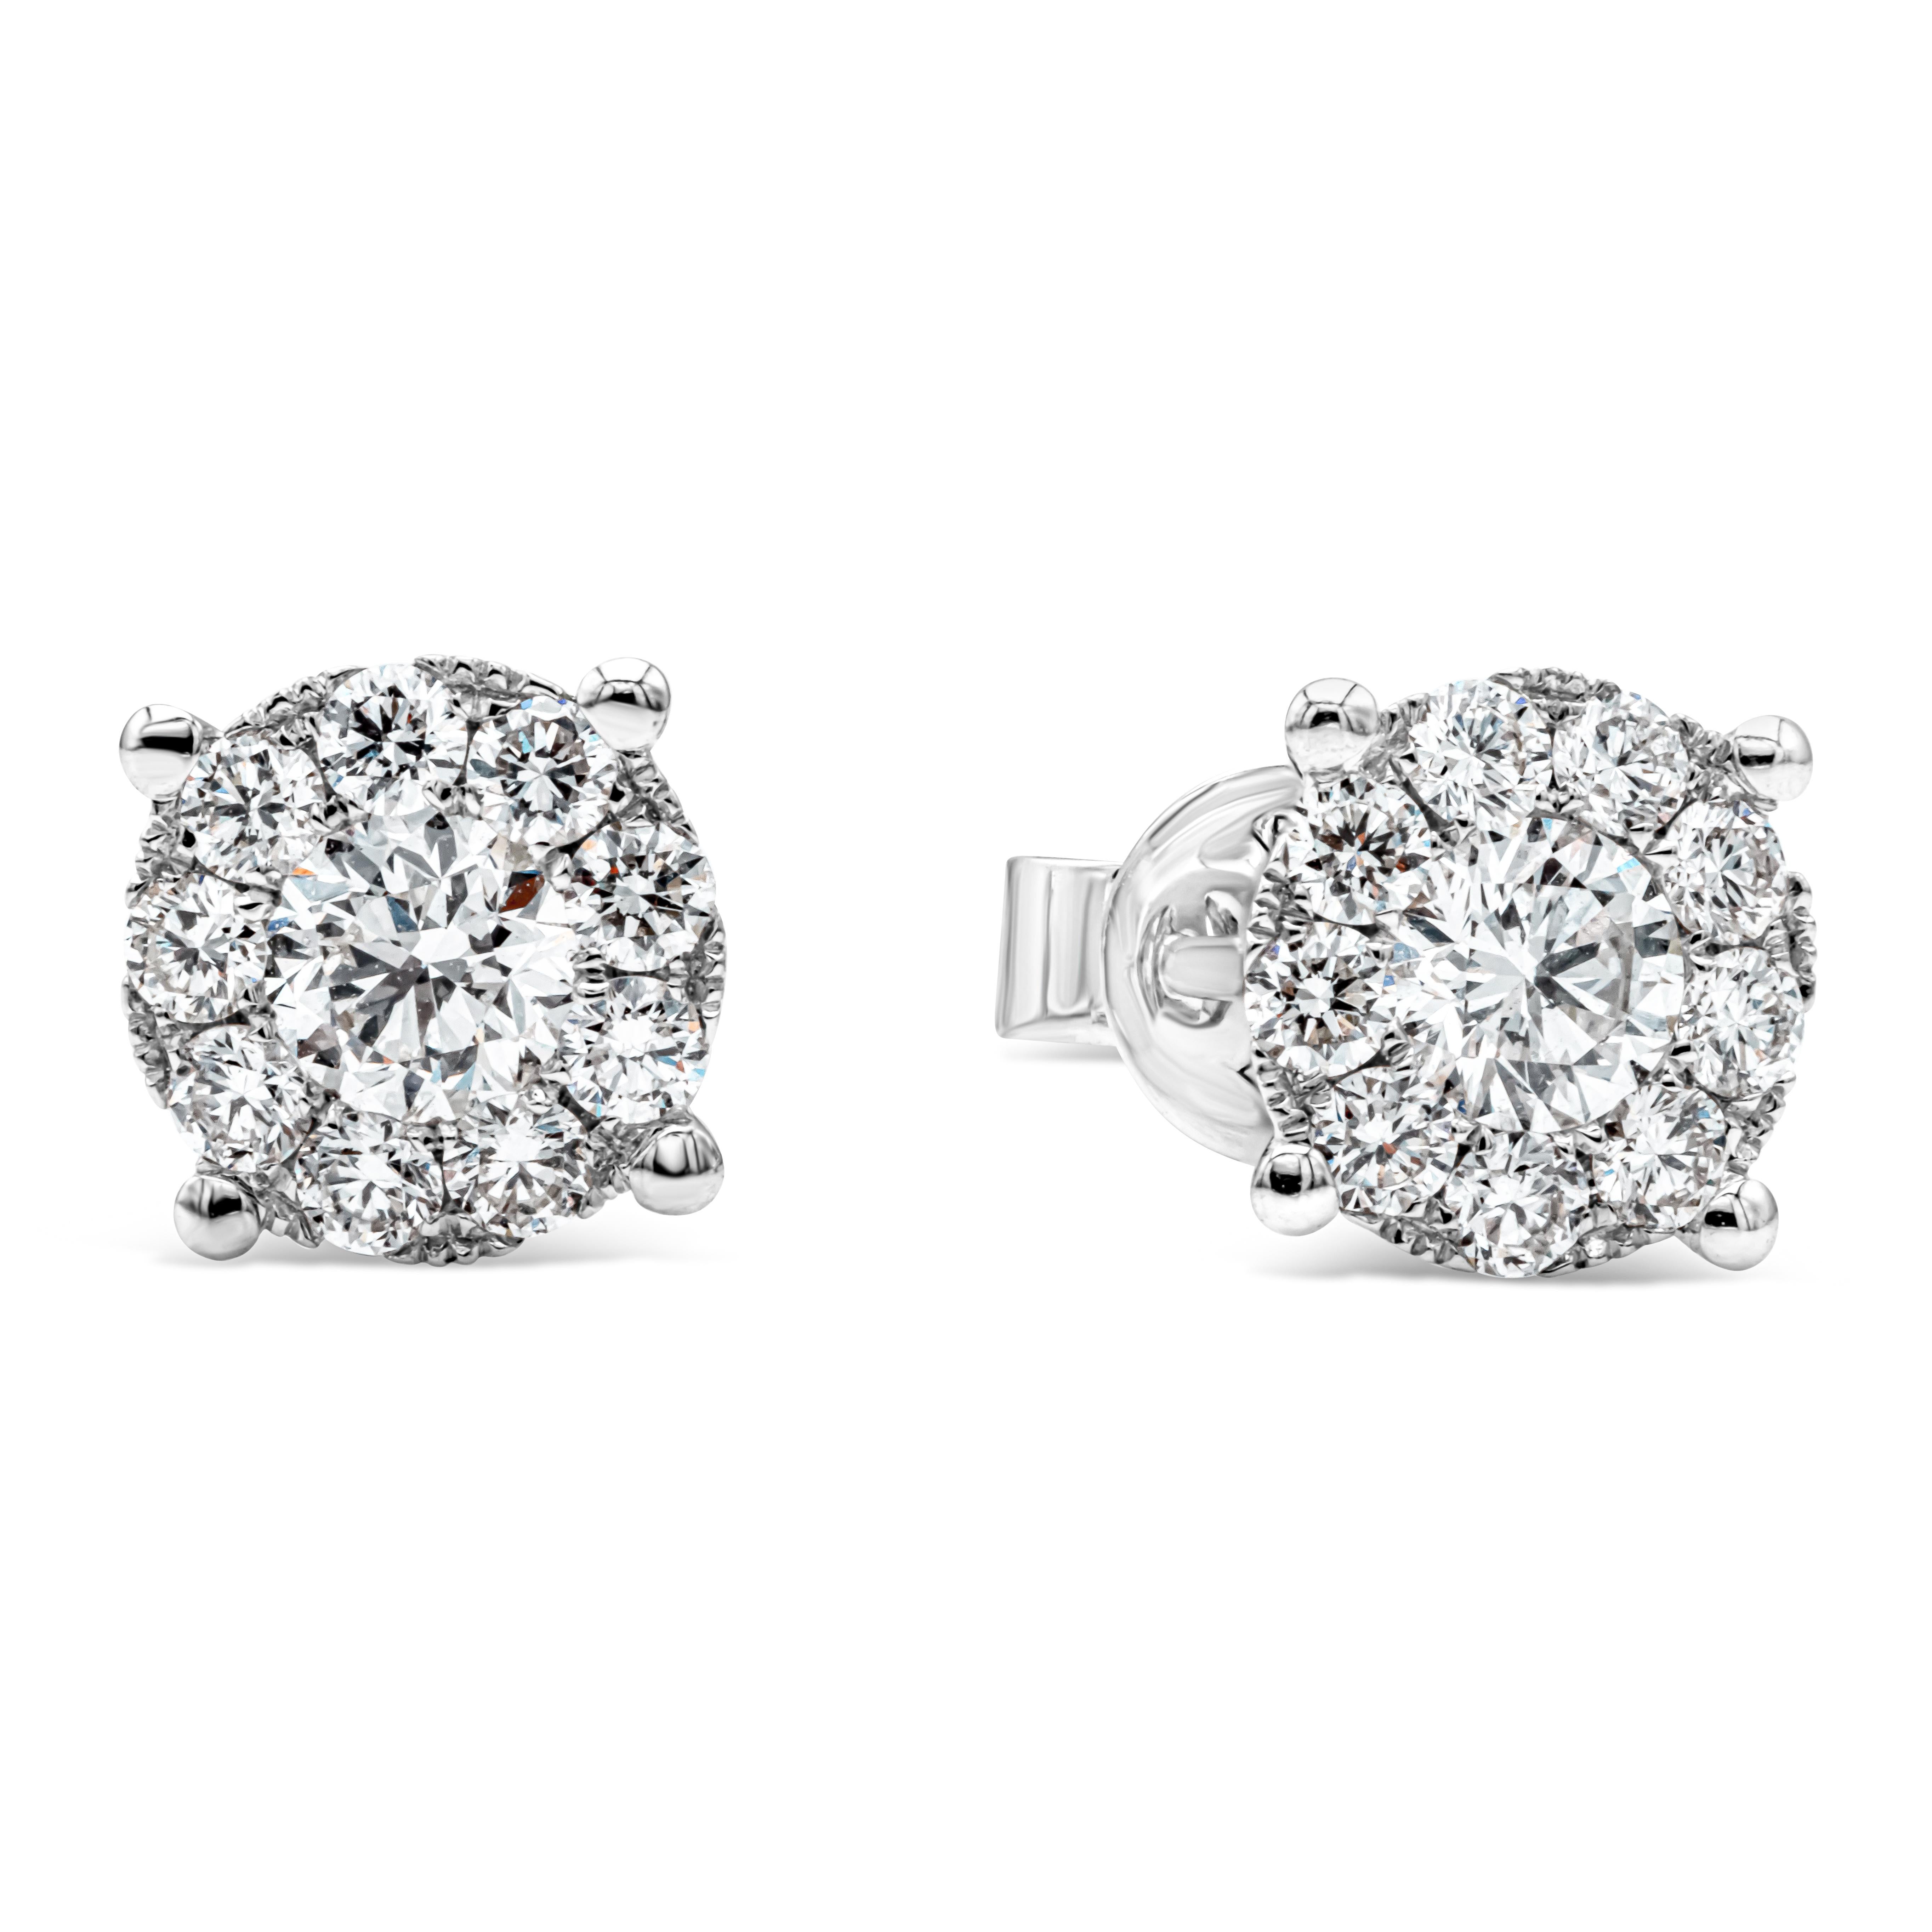 A brilliant pair of stud earrings showcasing a cluster of round brilliant diamonds weighing 1.13 carats total, F-G color and VS-SI in clarity, set in a classic four prong basket setting. The earrings exude the look of a one carat each diamond stud